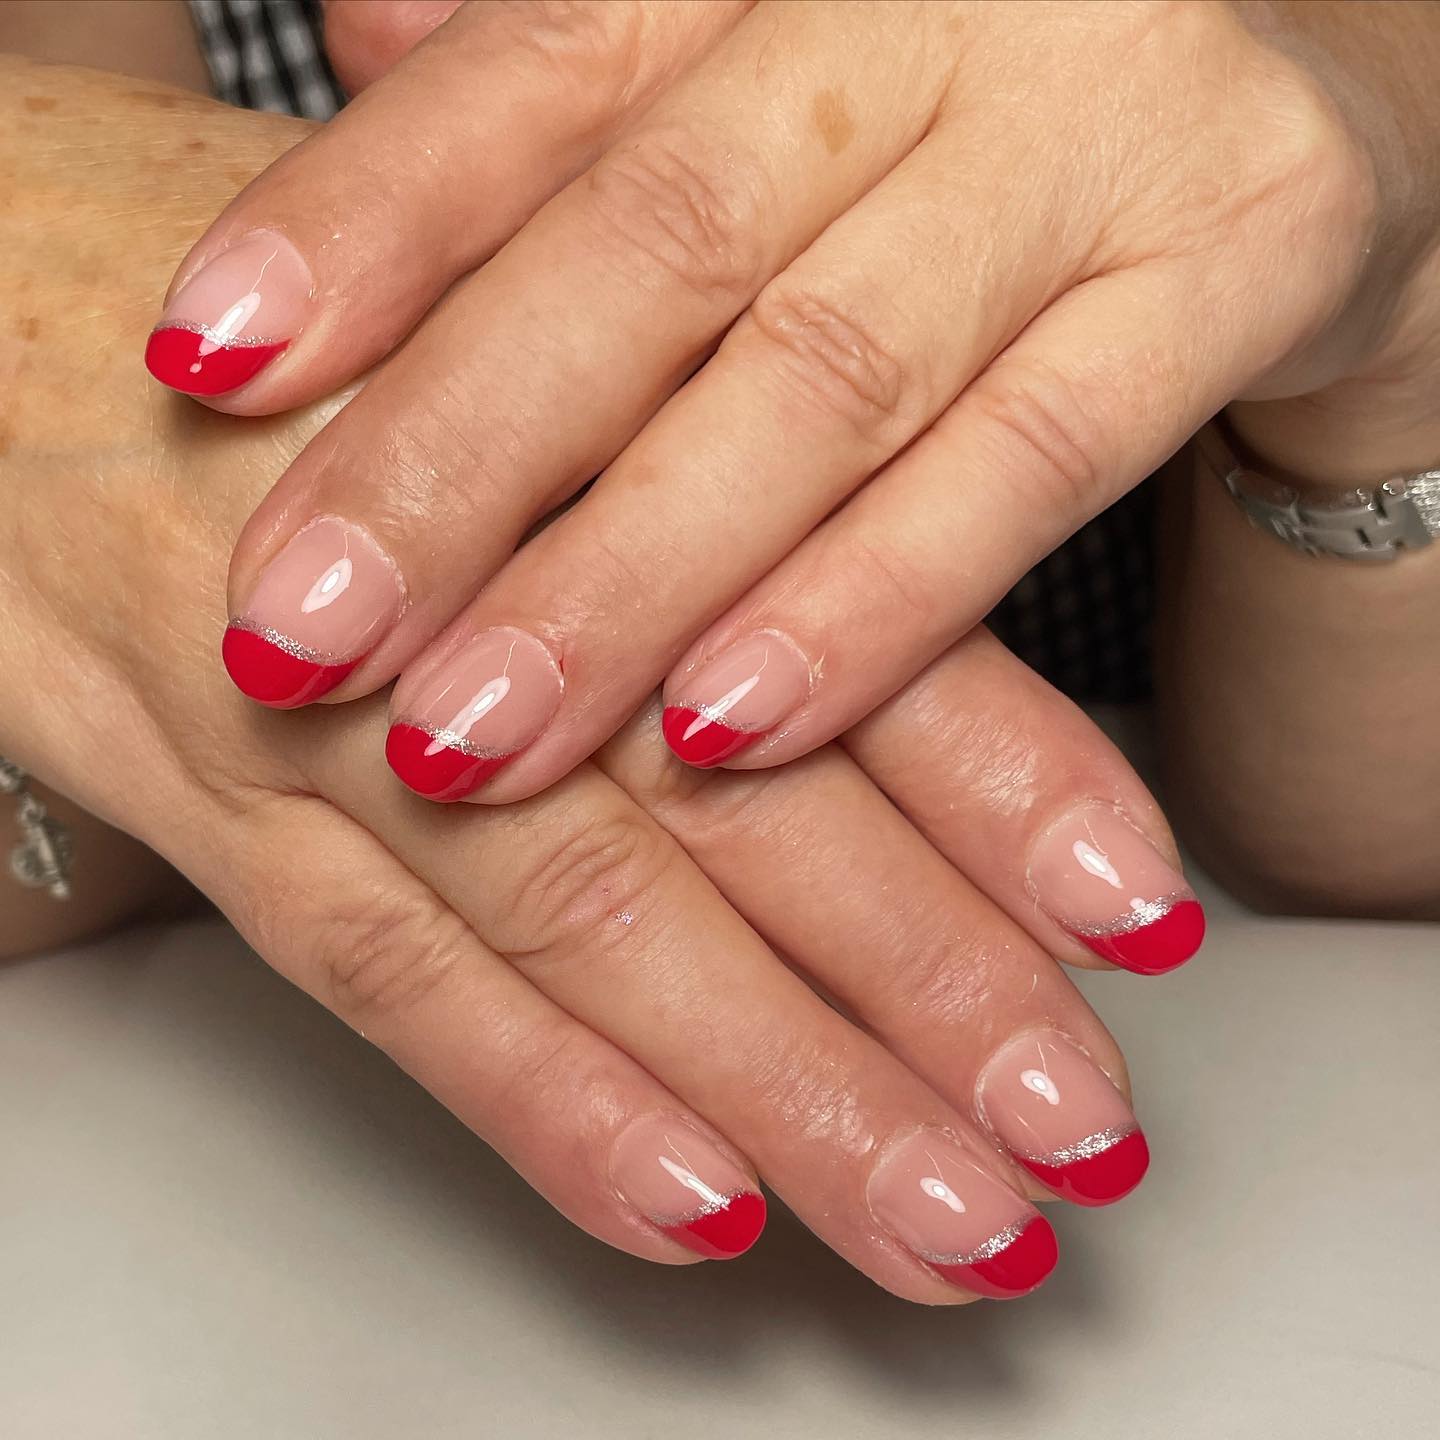  Here is another nail style idea for those who love french manicures. Red lines on nude base nails look gorgeous.